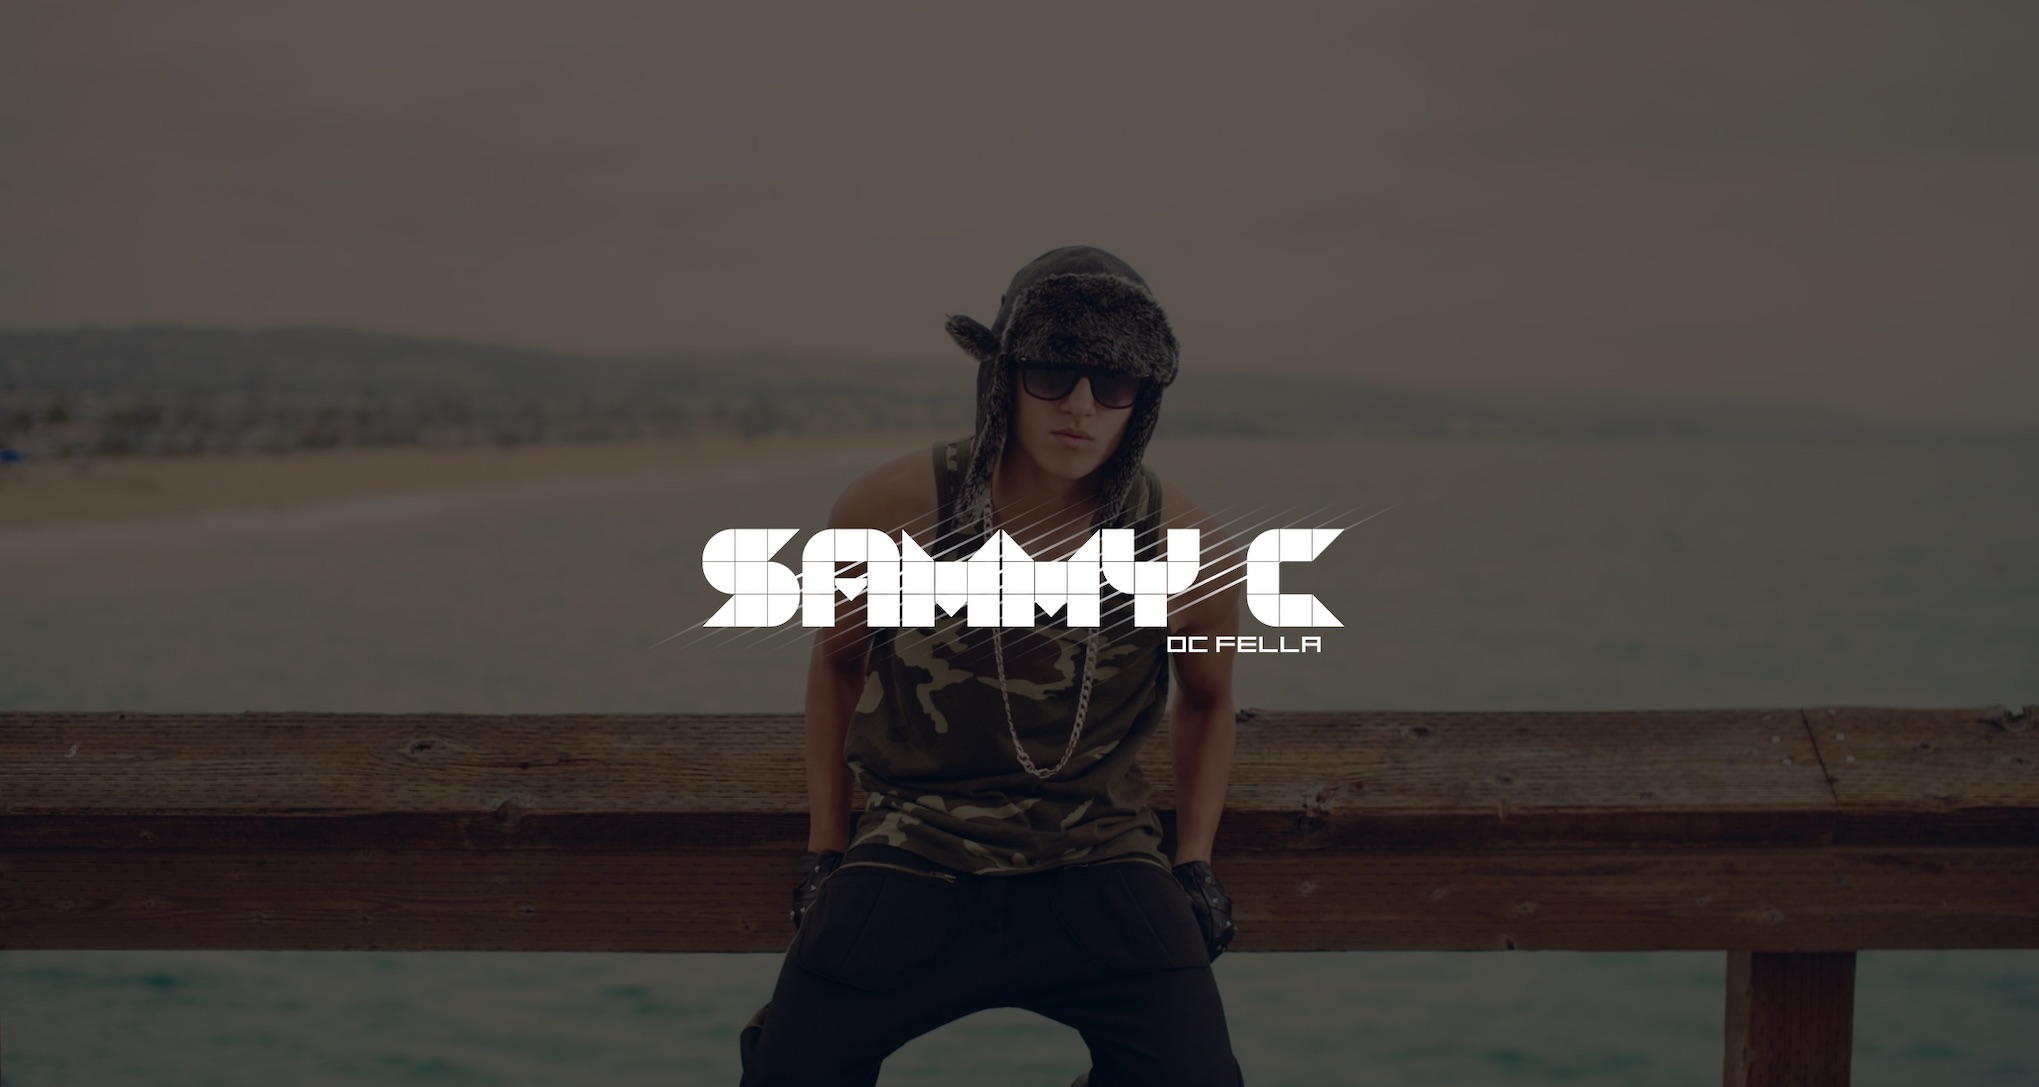 SammyC Artist Management Services White SammyC DC Fella logo on dimmed background of young man wearing a winter hat and camouflage tank top with chain, leather gloves and black pants